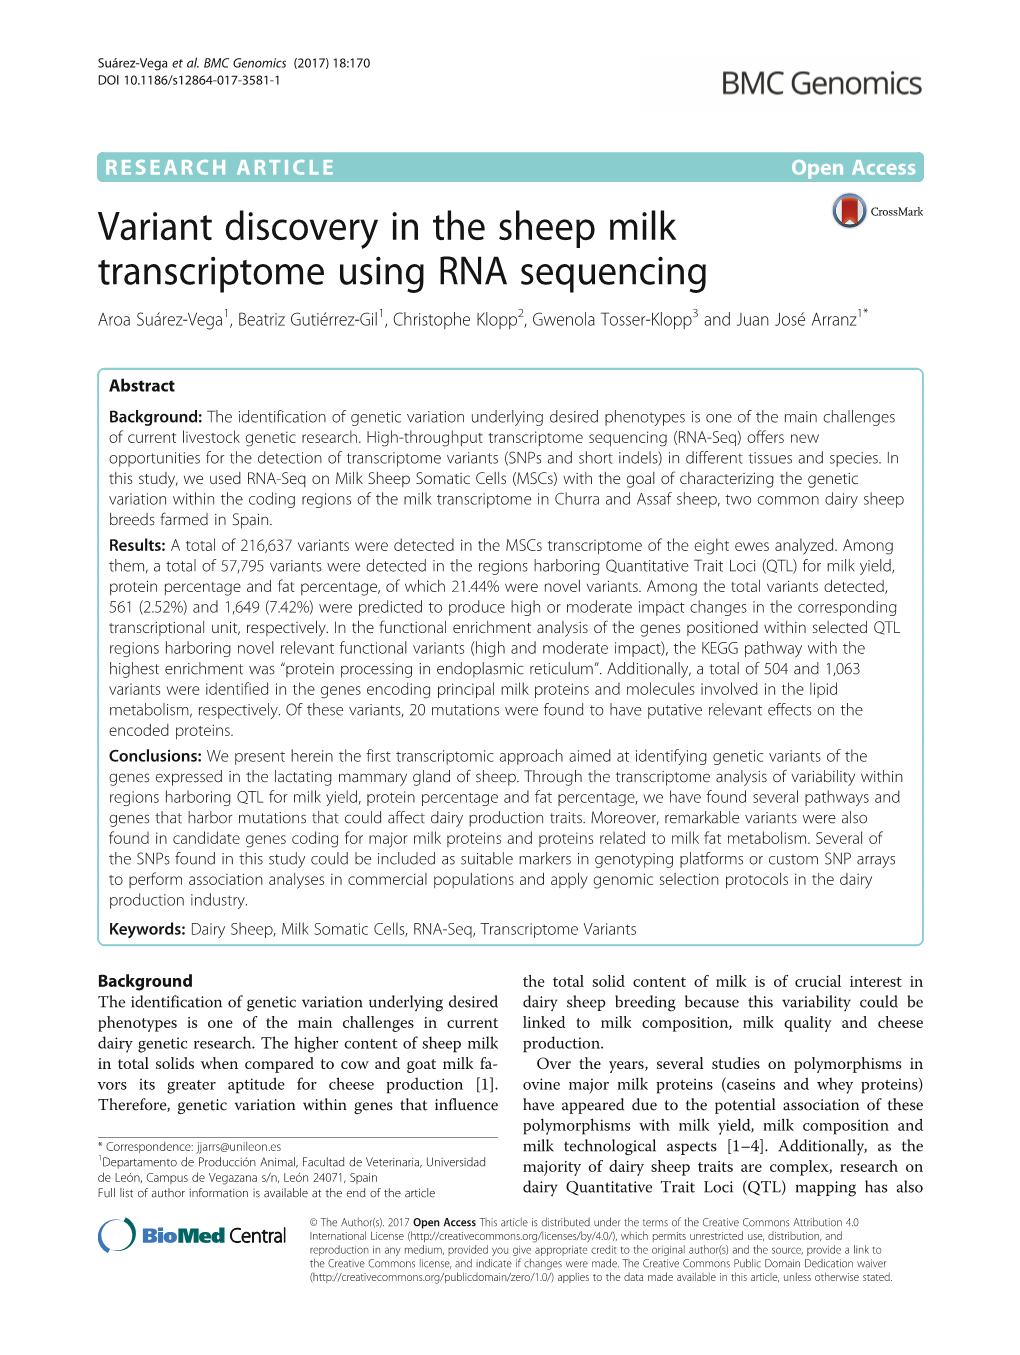 Variant Discovery in the Sheep Milk Transcriptome Using RNA Sequencing